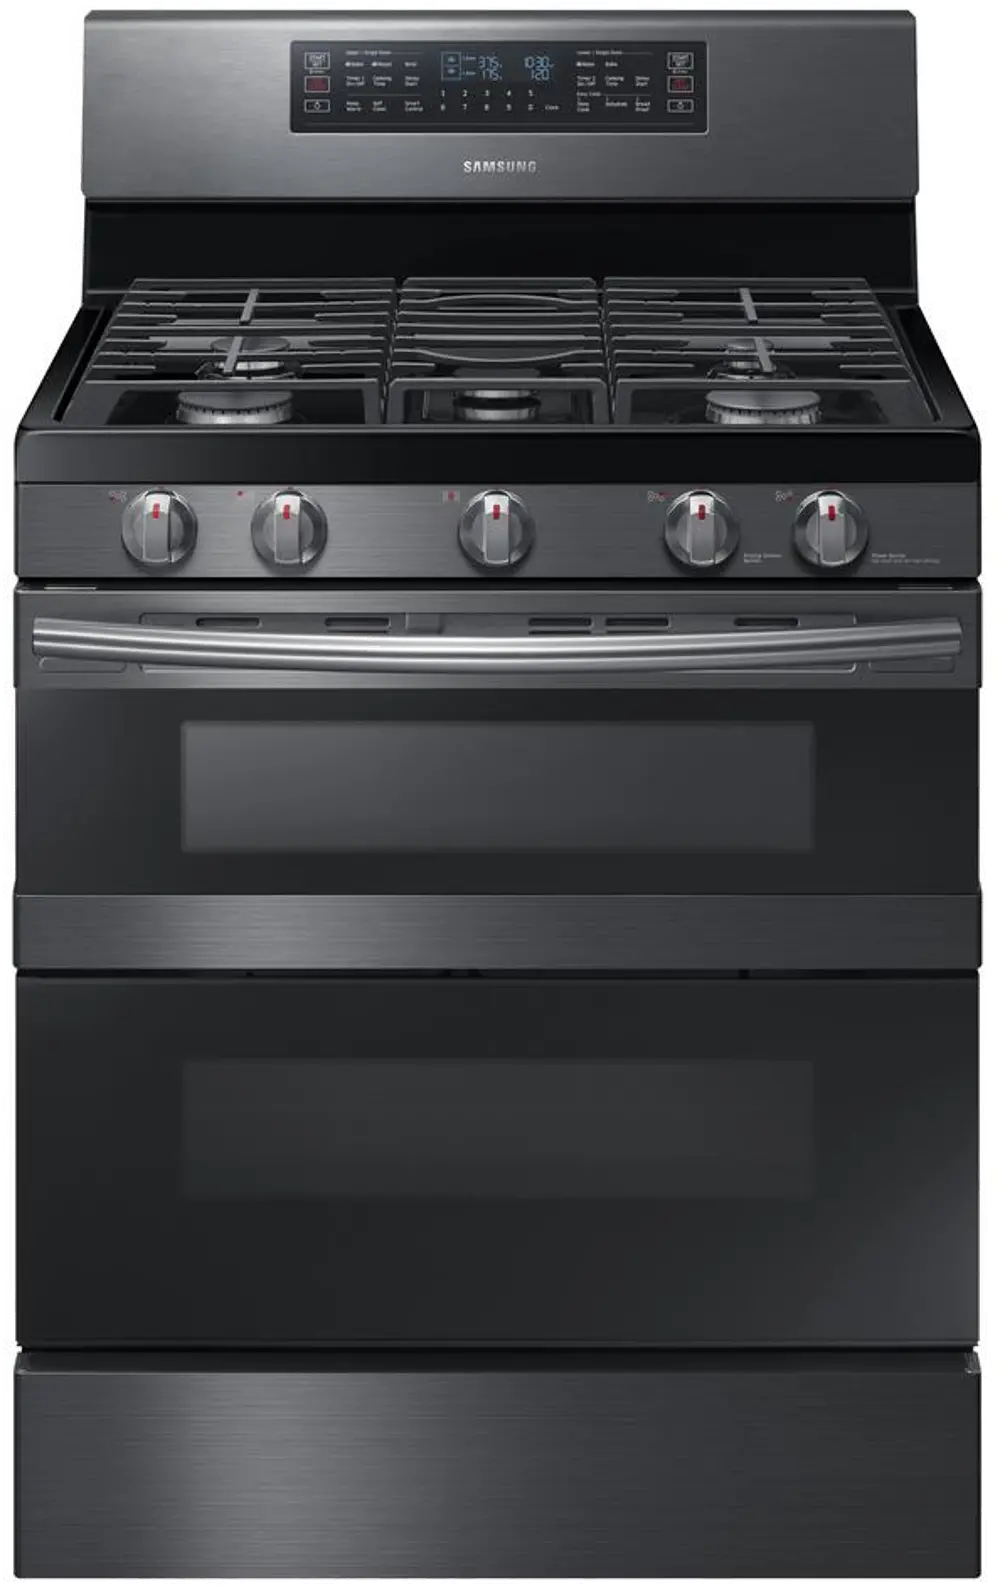 NX58M6850SG Samsung Gas Range with Dual Convection - 5.8 cu. ft. Black Stainless Steel-1